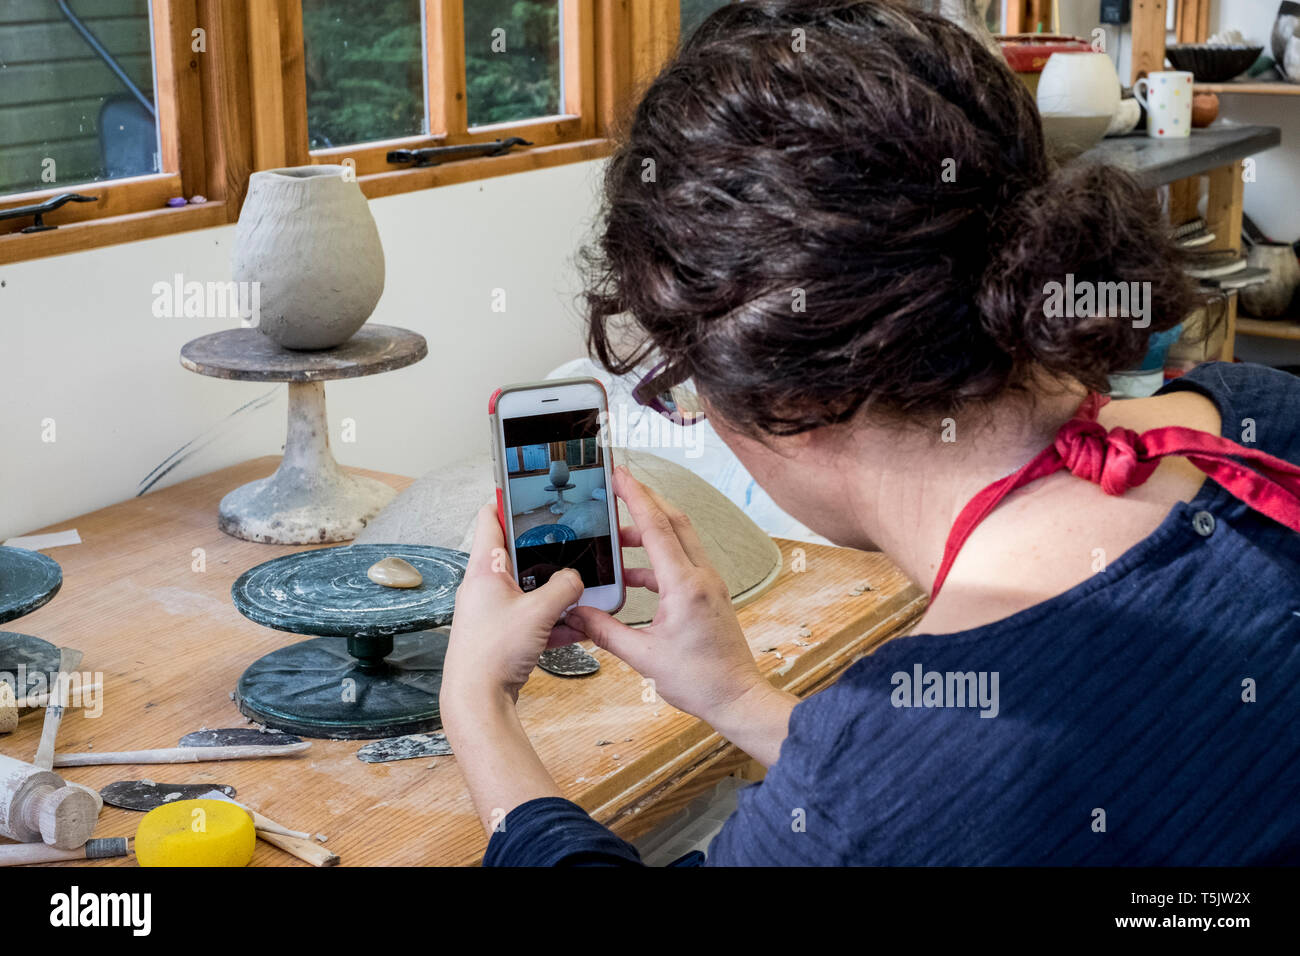 Over the shoulder view of woman sitting in her ceramics workshop, checking her mobile phone. Stock Photo